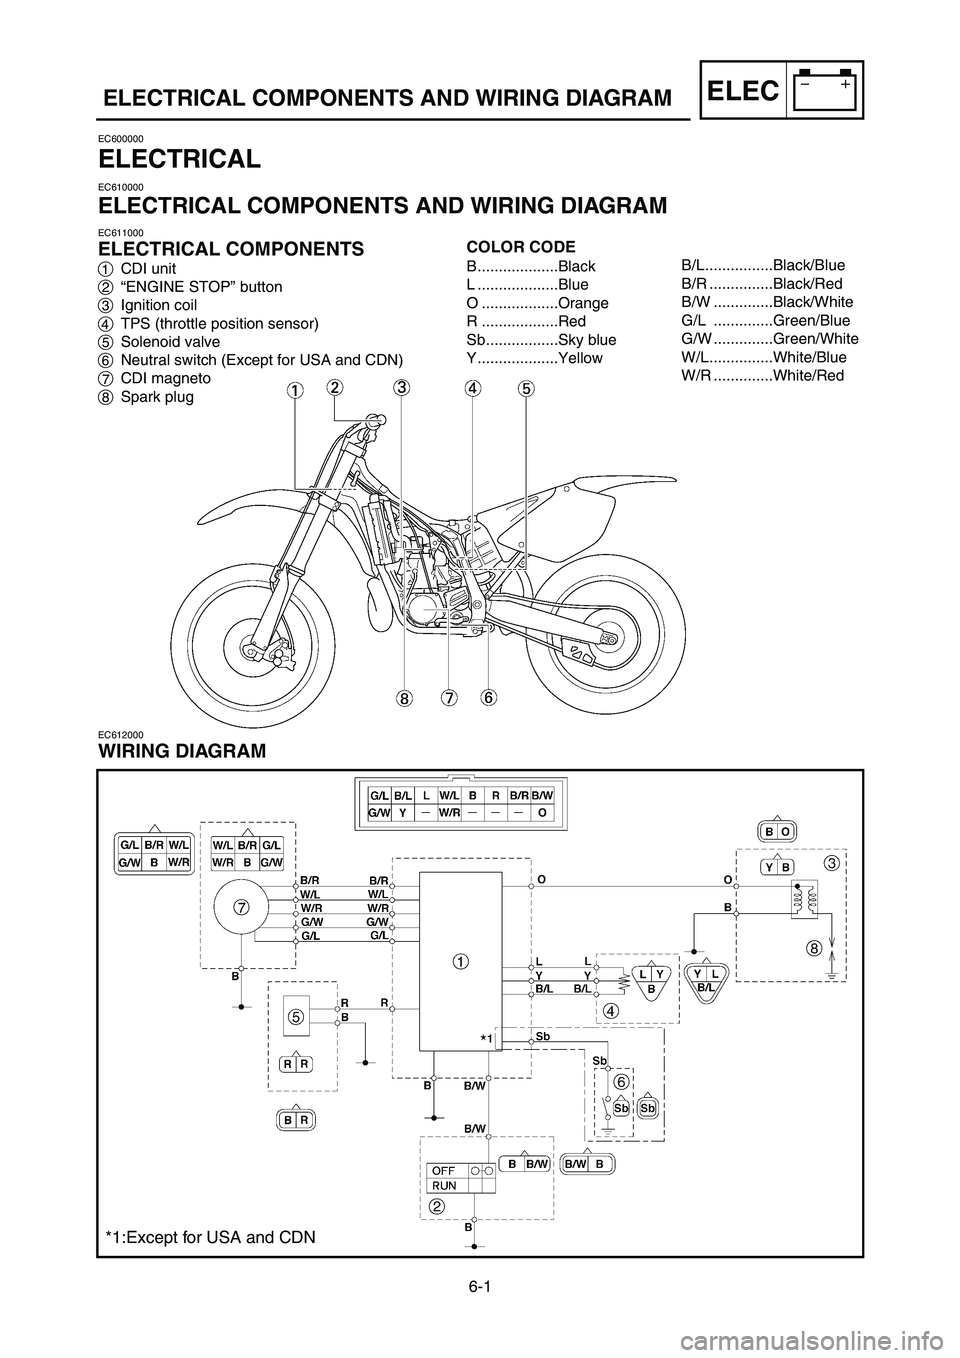 YAMAHA YZ250LC 2006  Manuale duso (in Italian) EC600000
ELECTRICAL
EC610000
ELECTRICAL COMPONENTS AND WIRING DIAGRAM
EC611000
ELECTRICAL COMPONENTS
1CDI unit
2“ENGINE STOP” button
3Ignition coil
4TPS (throttle position sensor)
5Solenoid valve
